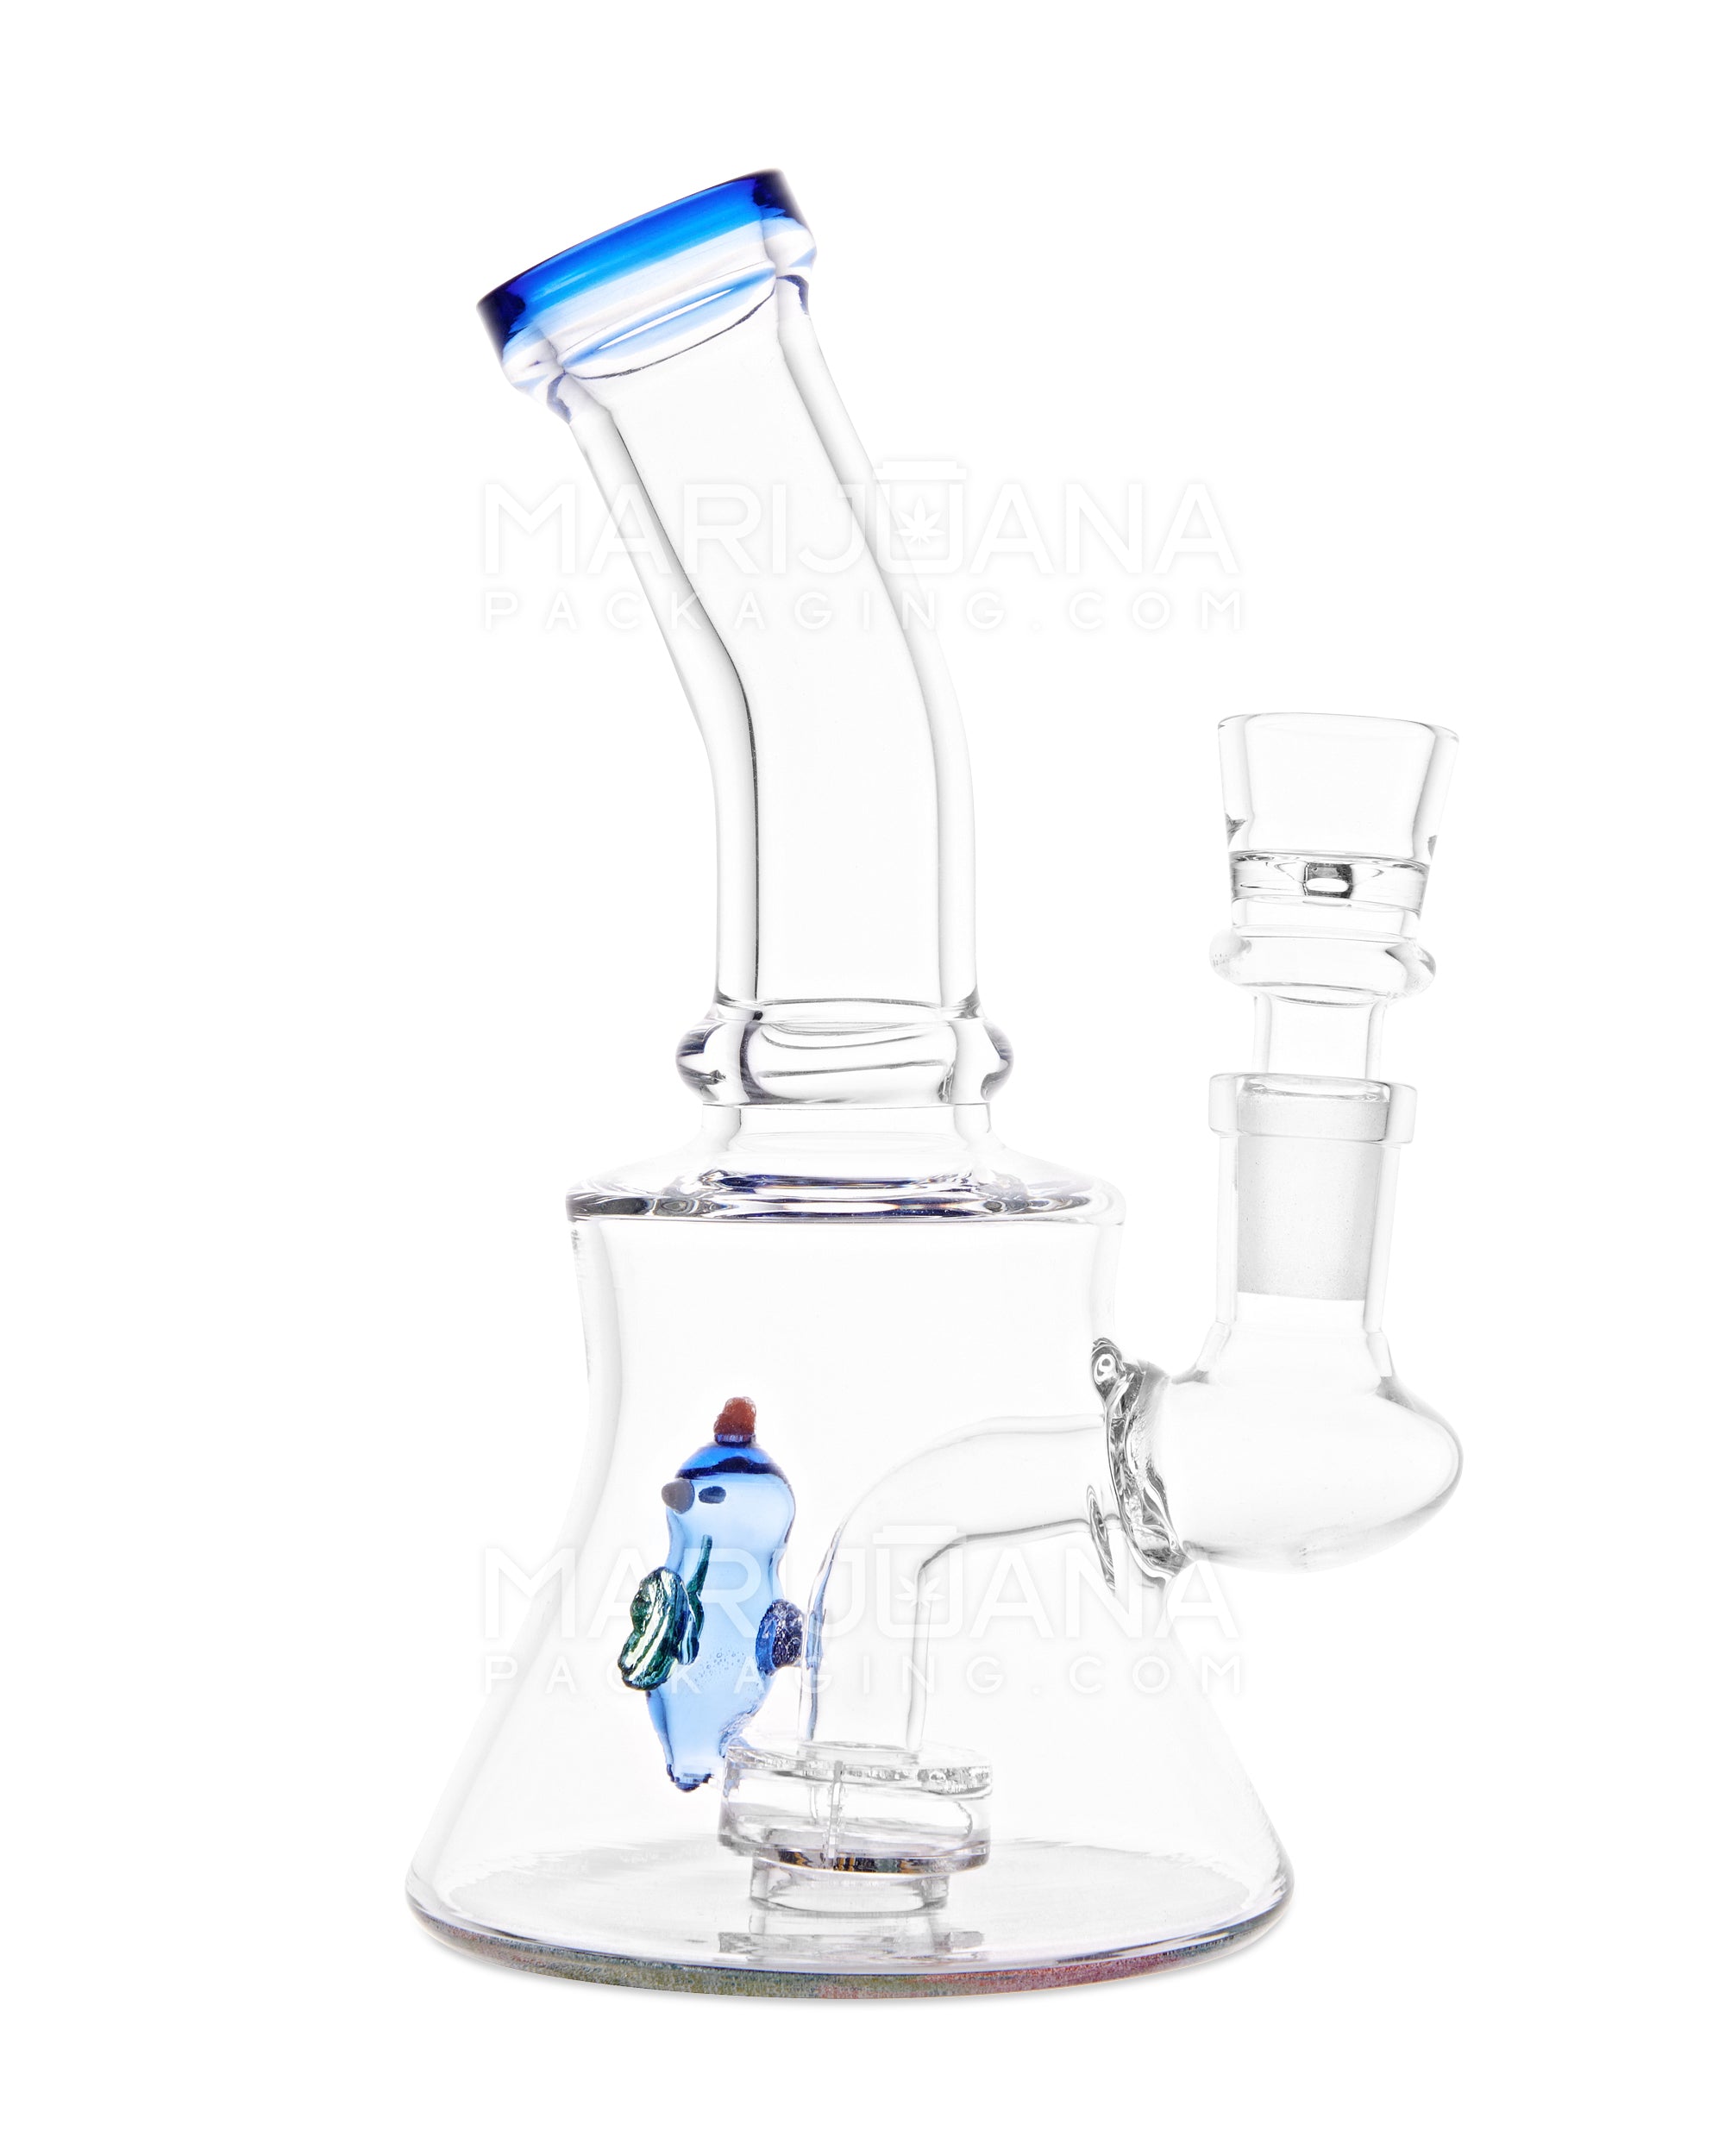 Bent Neck R&M Bee Showerhead Perc Glass Water Pipe w/ Base Decals | 7in Tall - 14mm Bowl - Assorted - 1